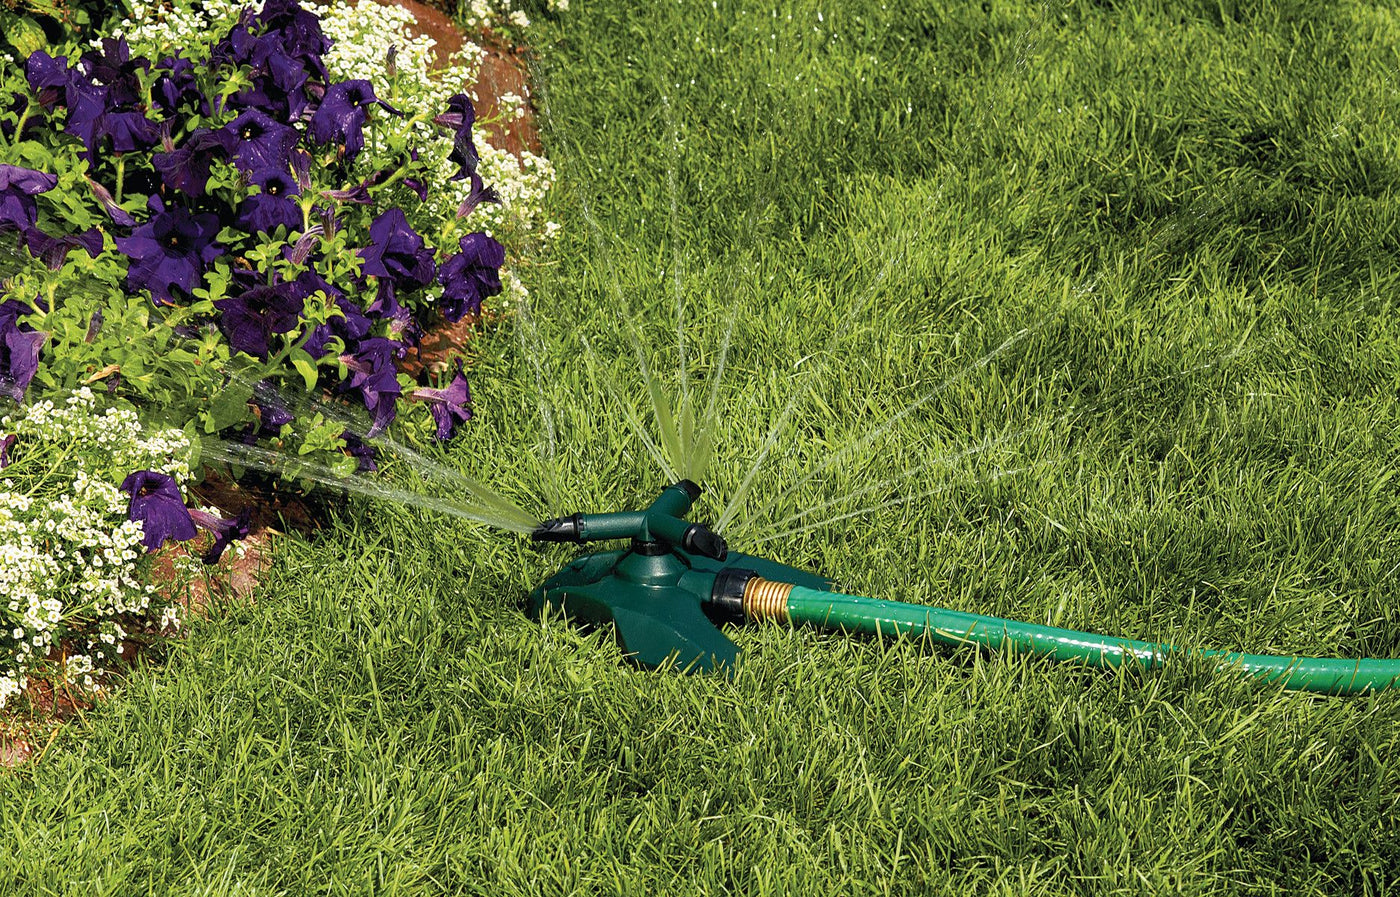 Green and black 3-arm plastic revolving sprinkler on plastic base spraying water on grass and flowers.